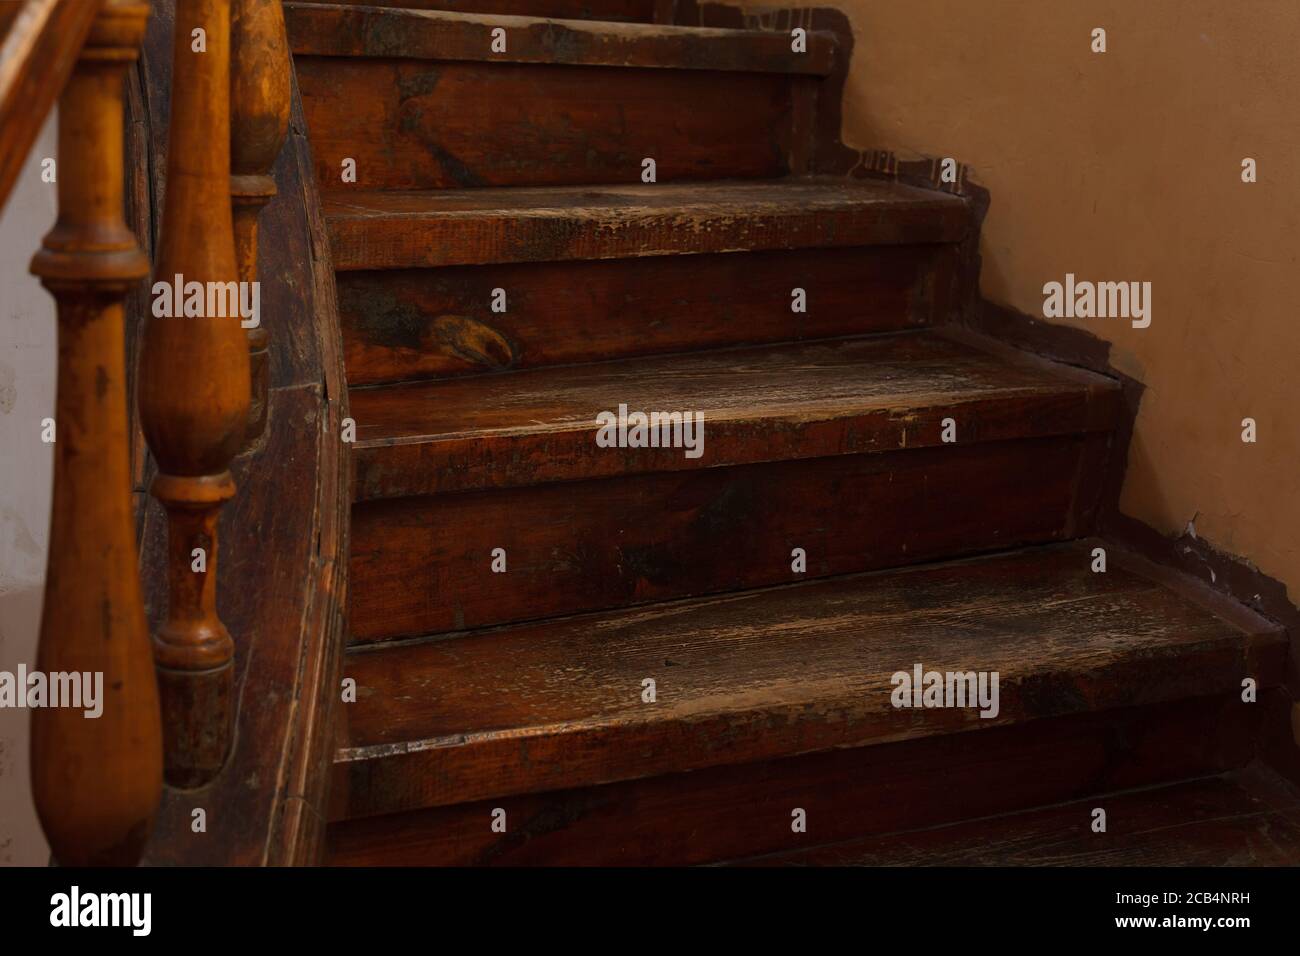 Shabby steps of old wooden staircase with selective focus Stock Photo